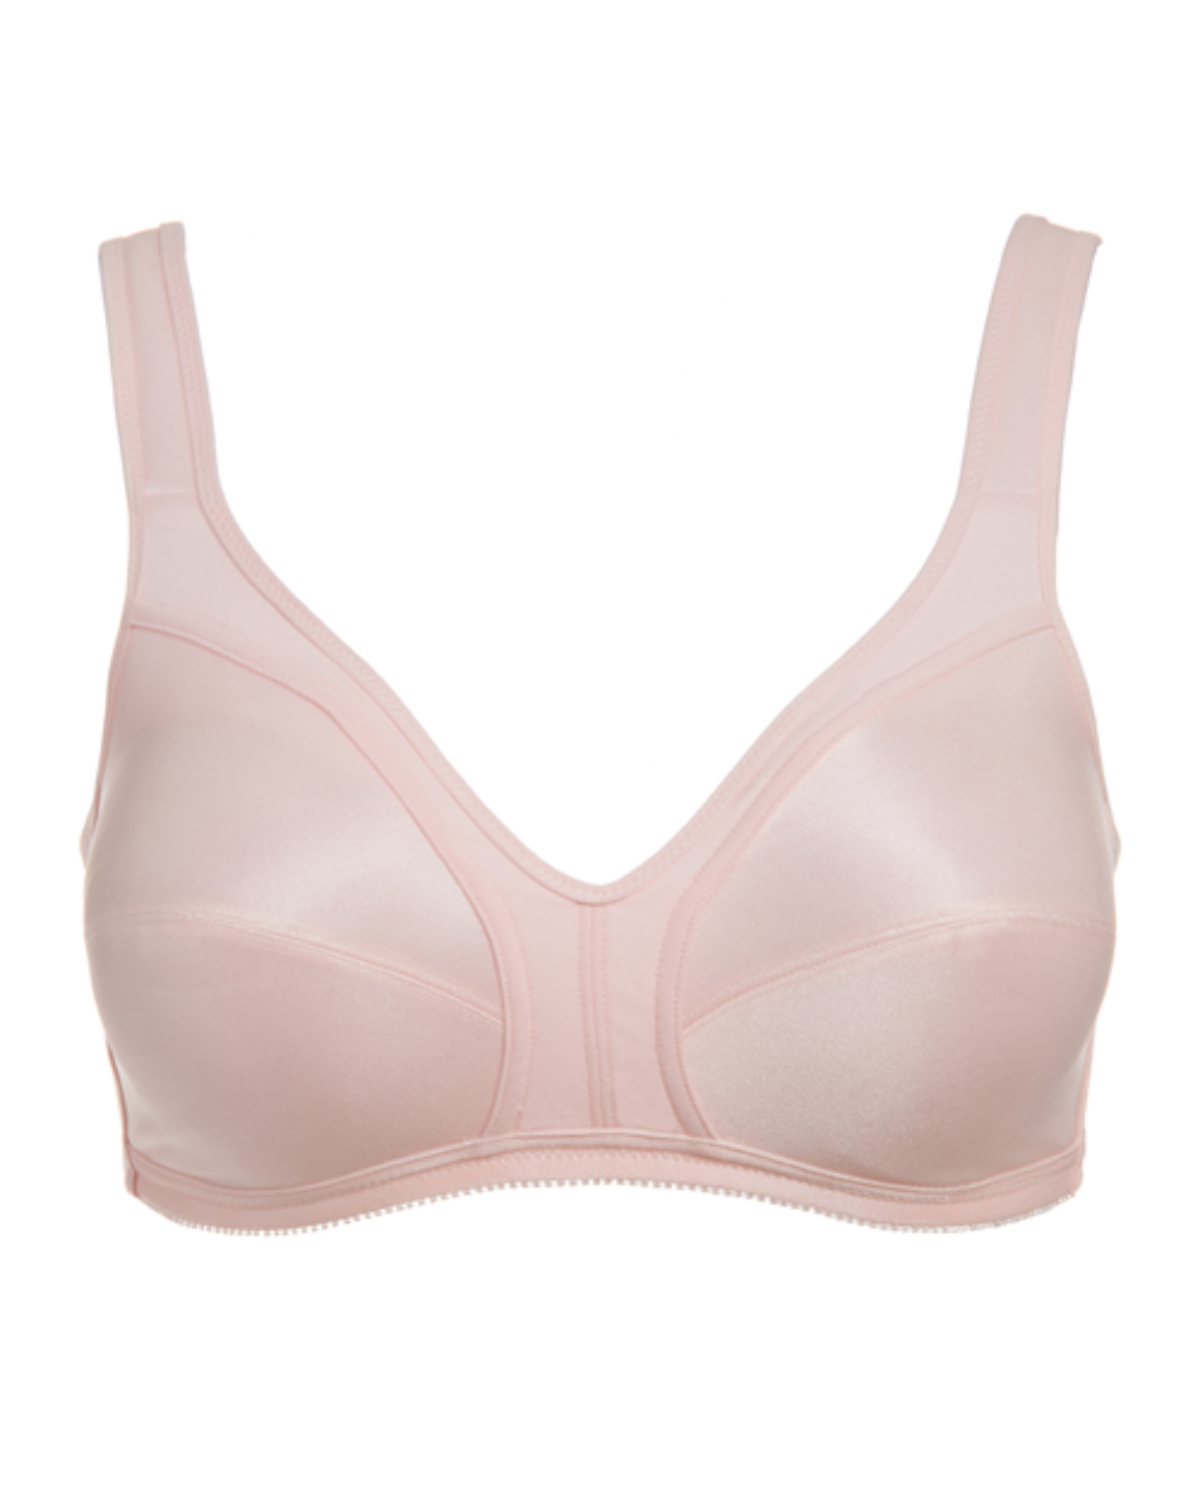 Dominique Isabelle Wire Free Cotton Lined Bra (More colors